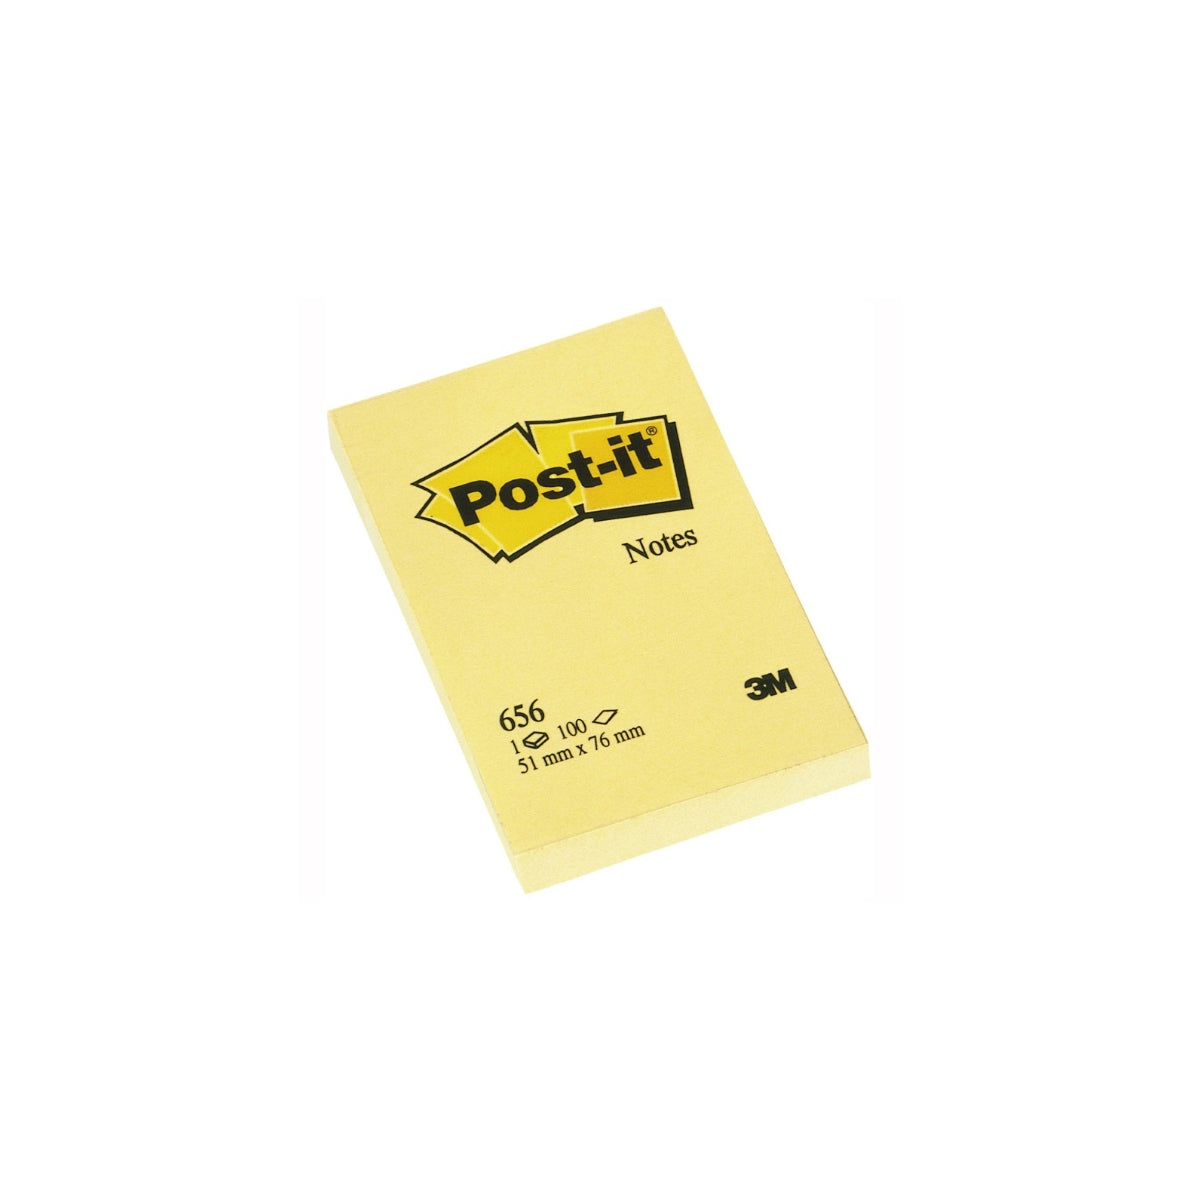 3M Post-it Notes 656, 2x3 inches, Canary Yellow